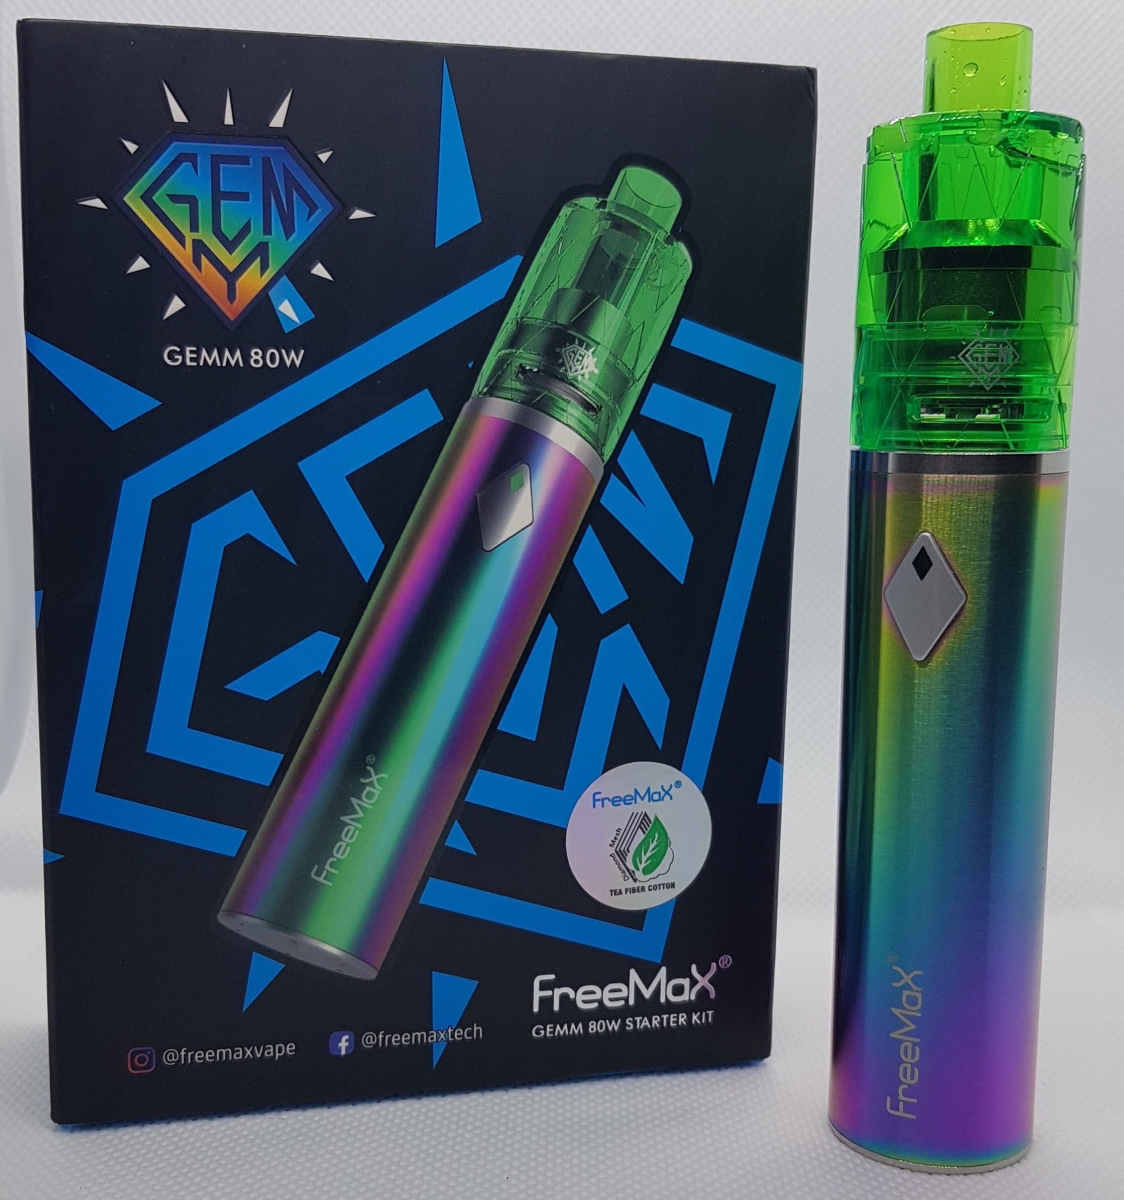 FreeMax Gemm 80w with packaging